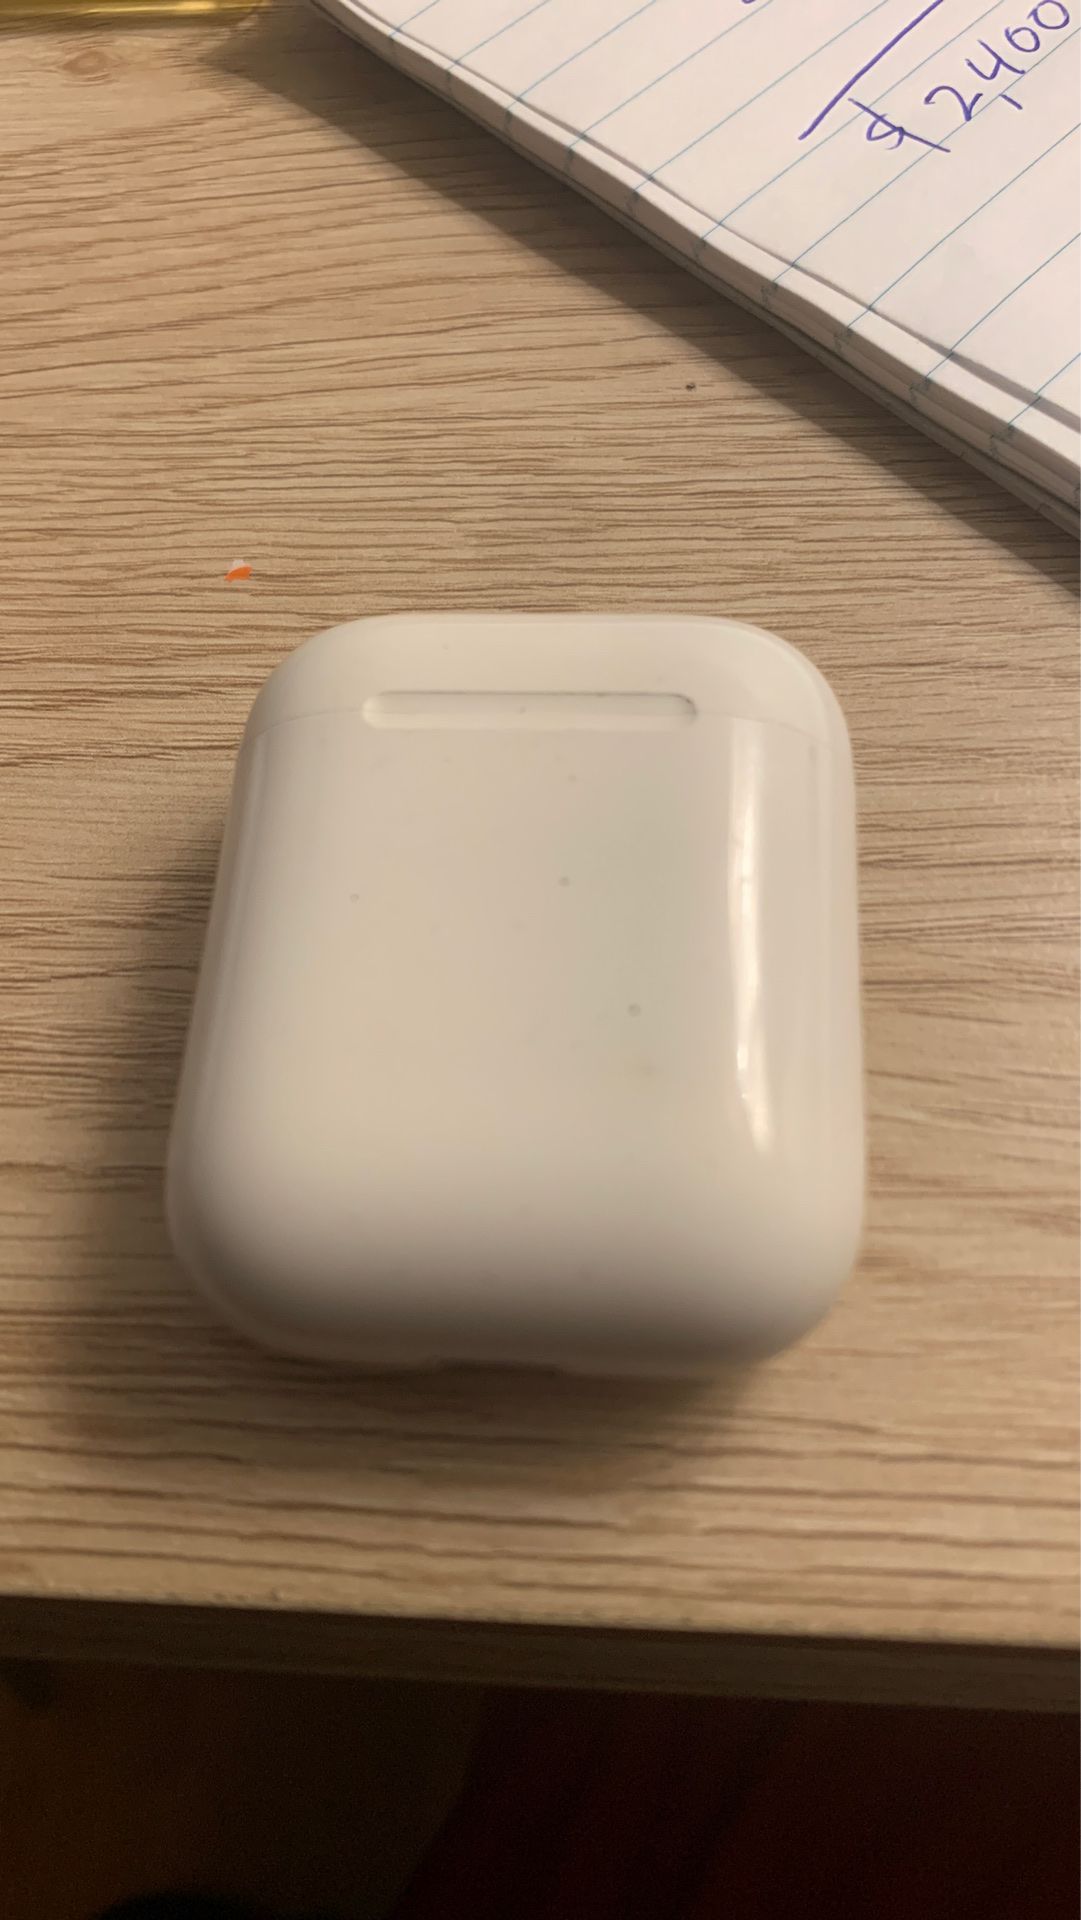 Apple AirPods 2 charger casing!